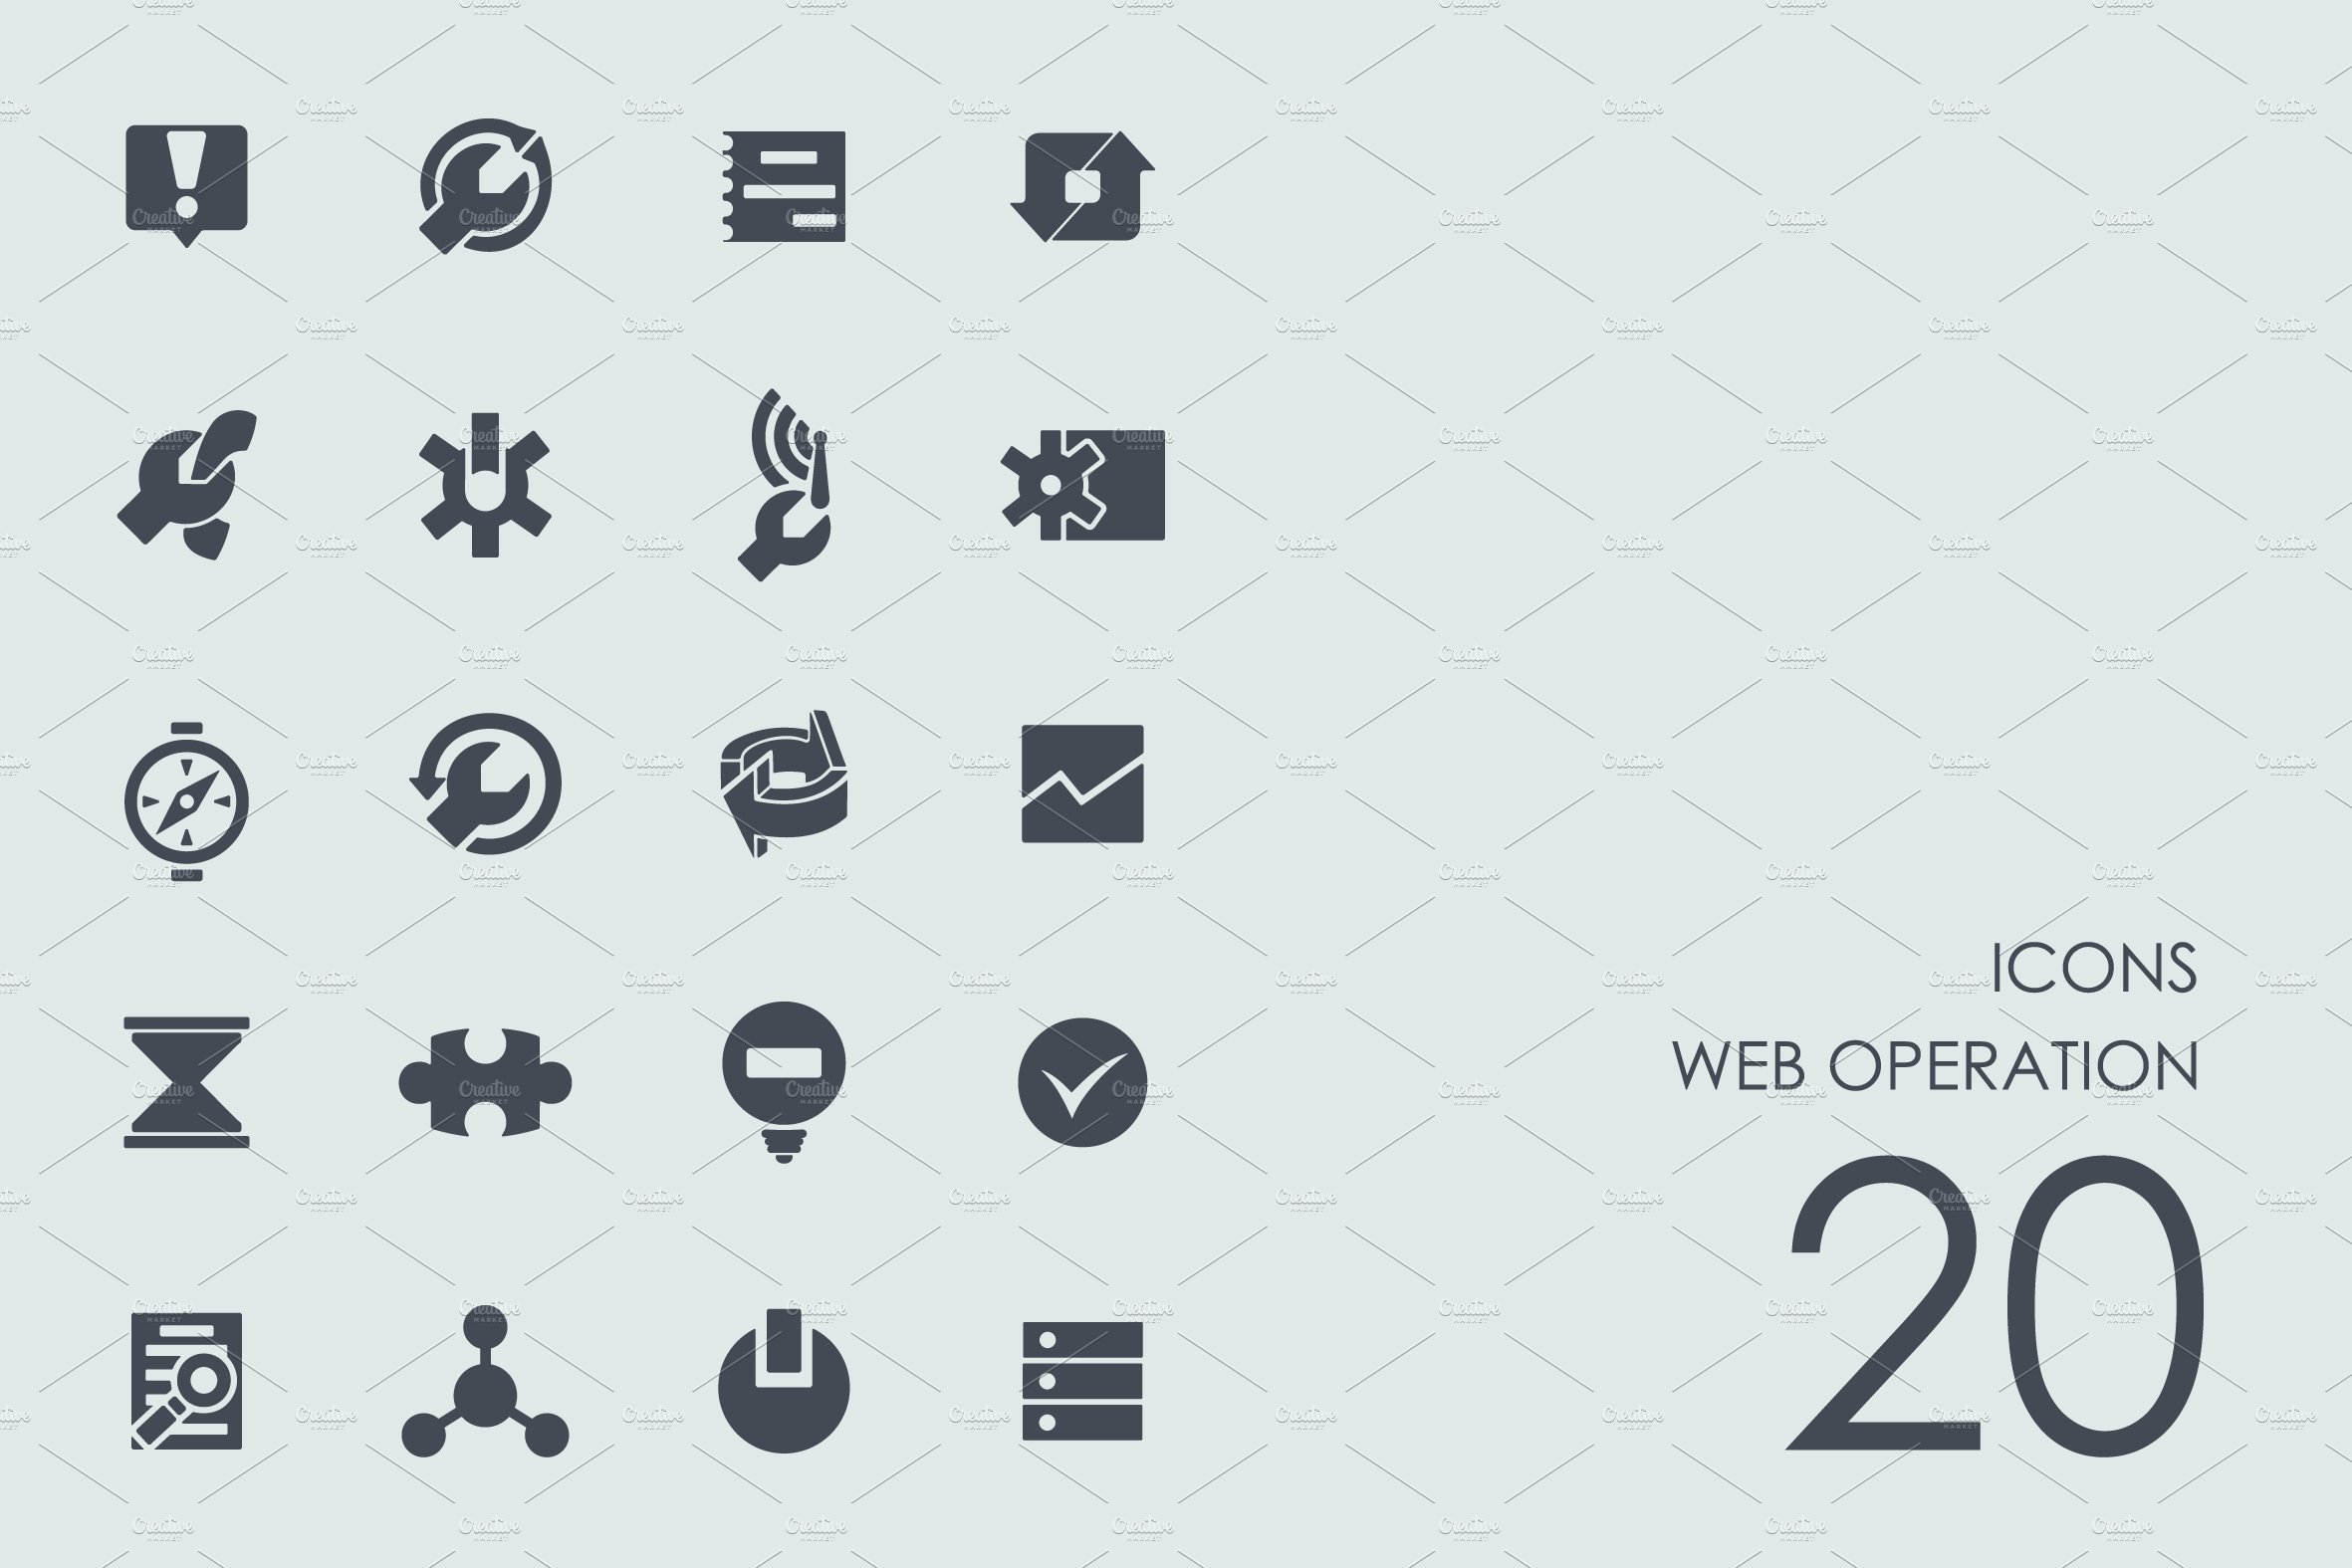 Web operation icons cover image.